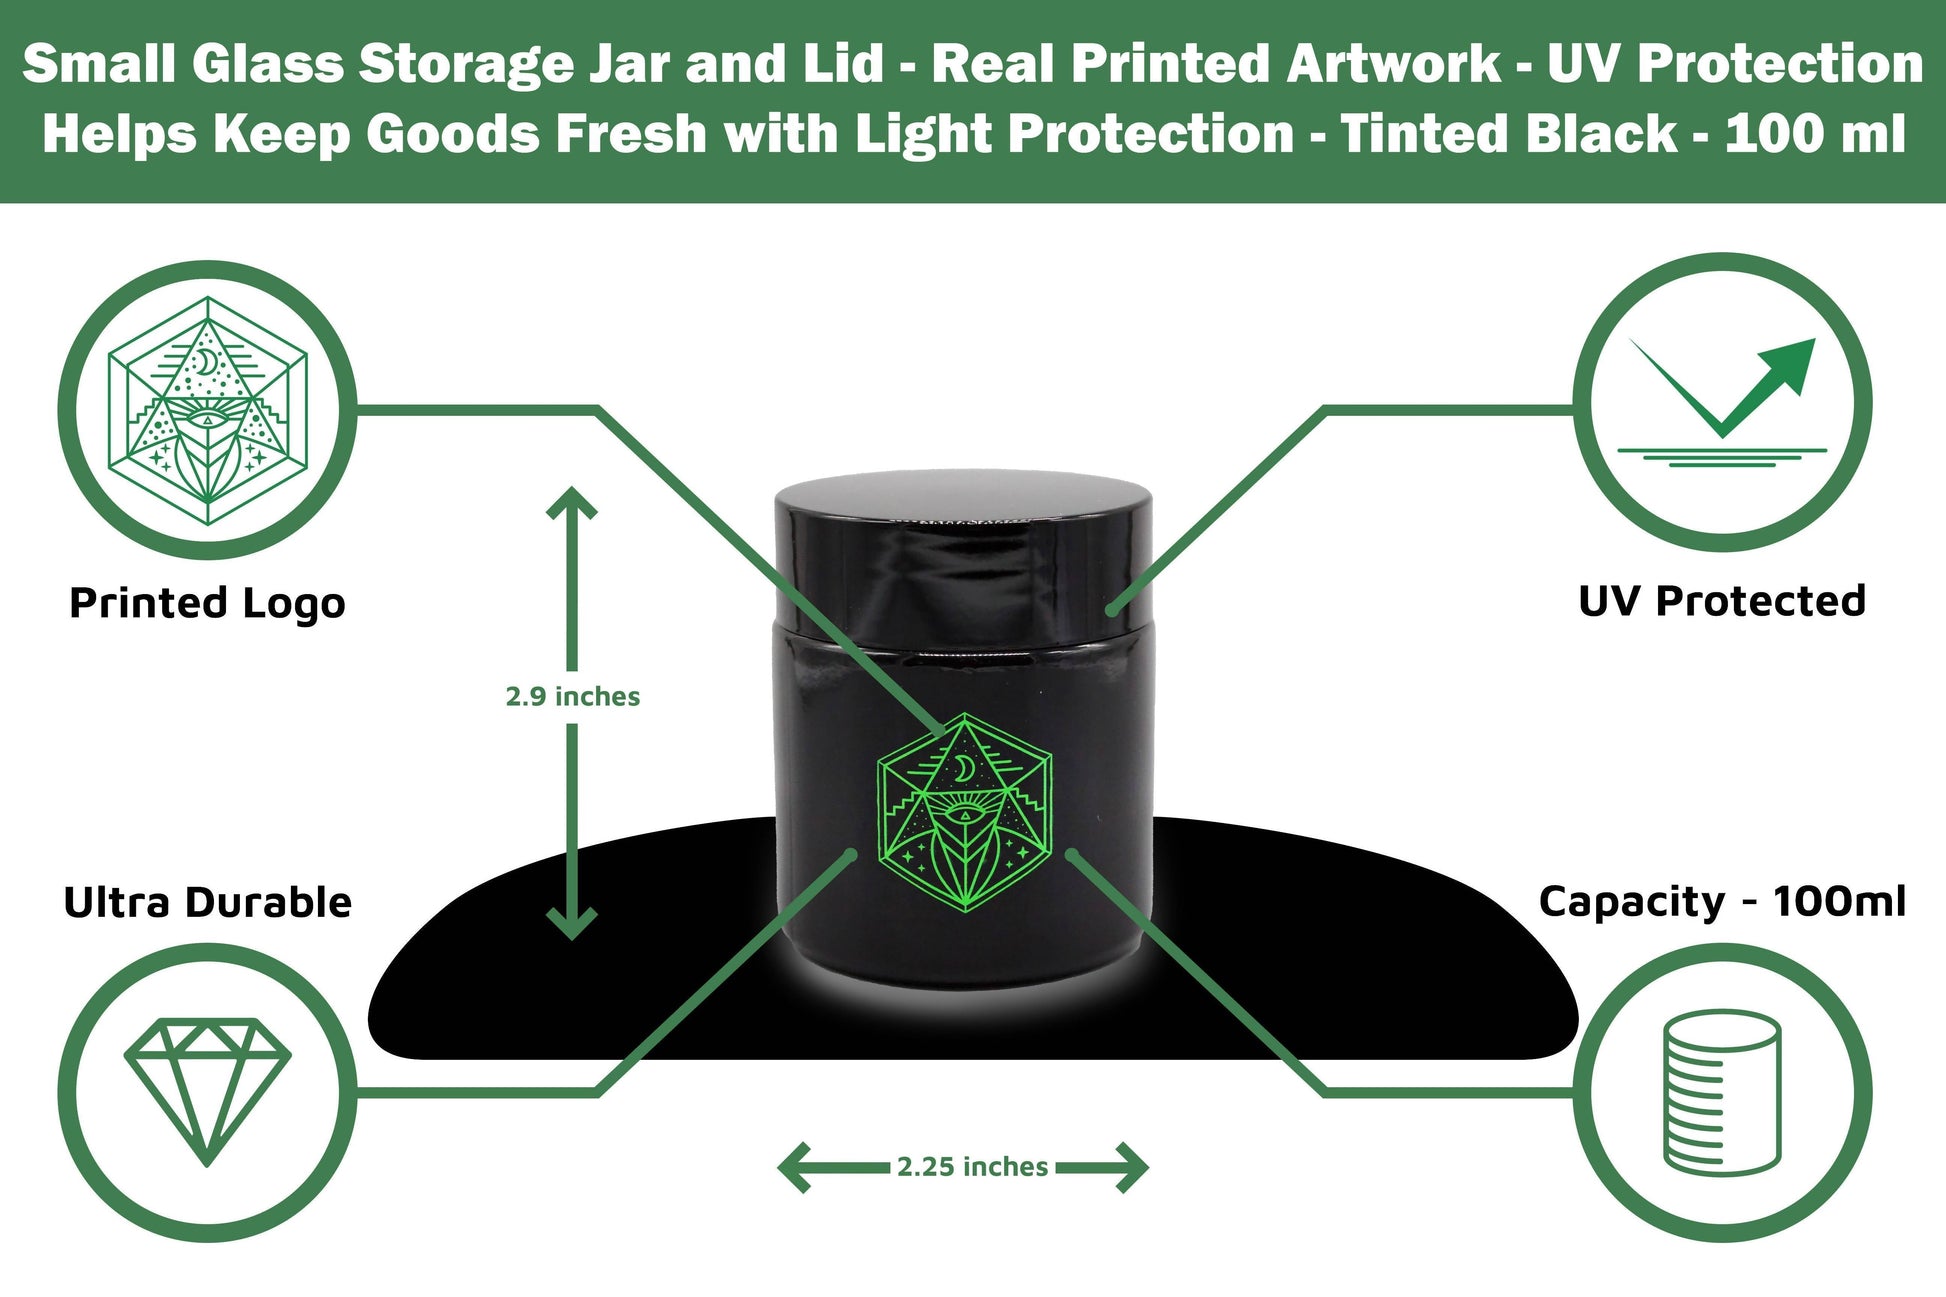 Small Glass Storage Jar and Lid - Real Printed Artwork - UV Protection - Helps Keep Goods Fresh with Light Protection- Tinted Black - 100 ml - Ancient Symbol Design - Accessories By Leaf-Way Brand_2